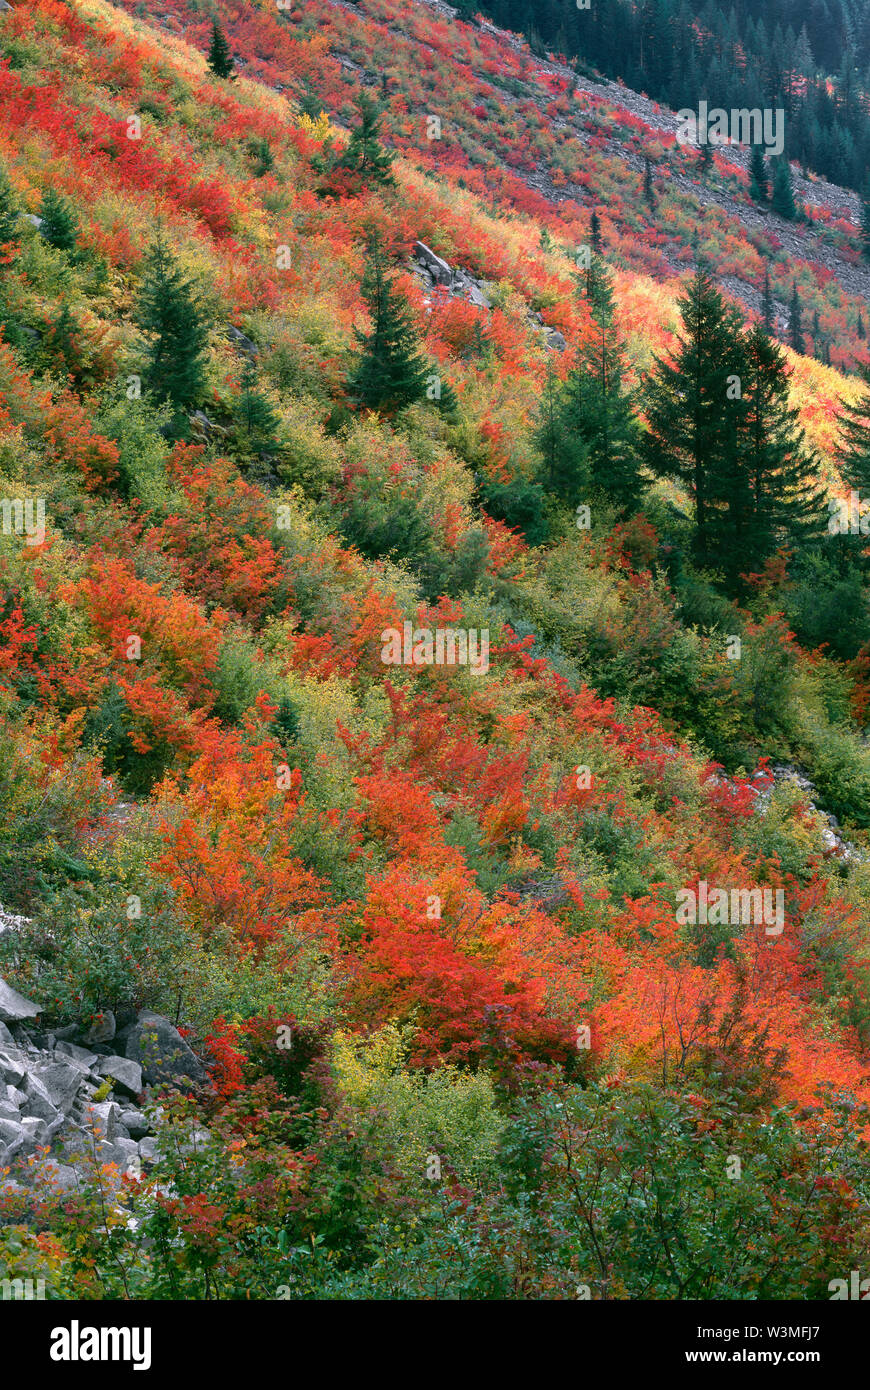 USA, Washington, Mt. Rainier National Park, Vine maple displays autumn color on slopes with scattered conifers in Stevens Canyon. Stock Photo